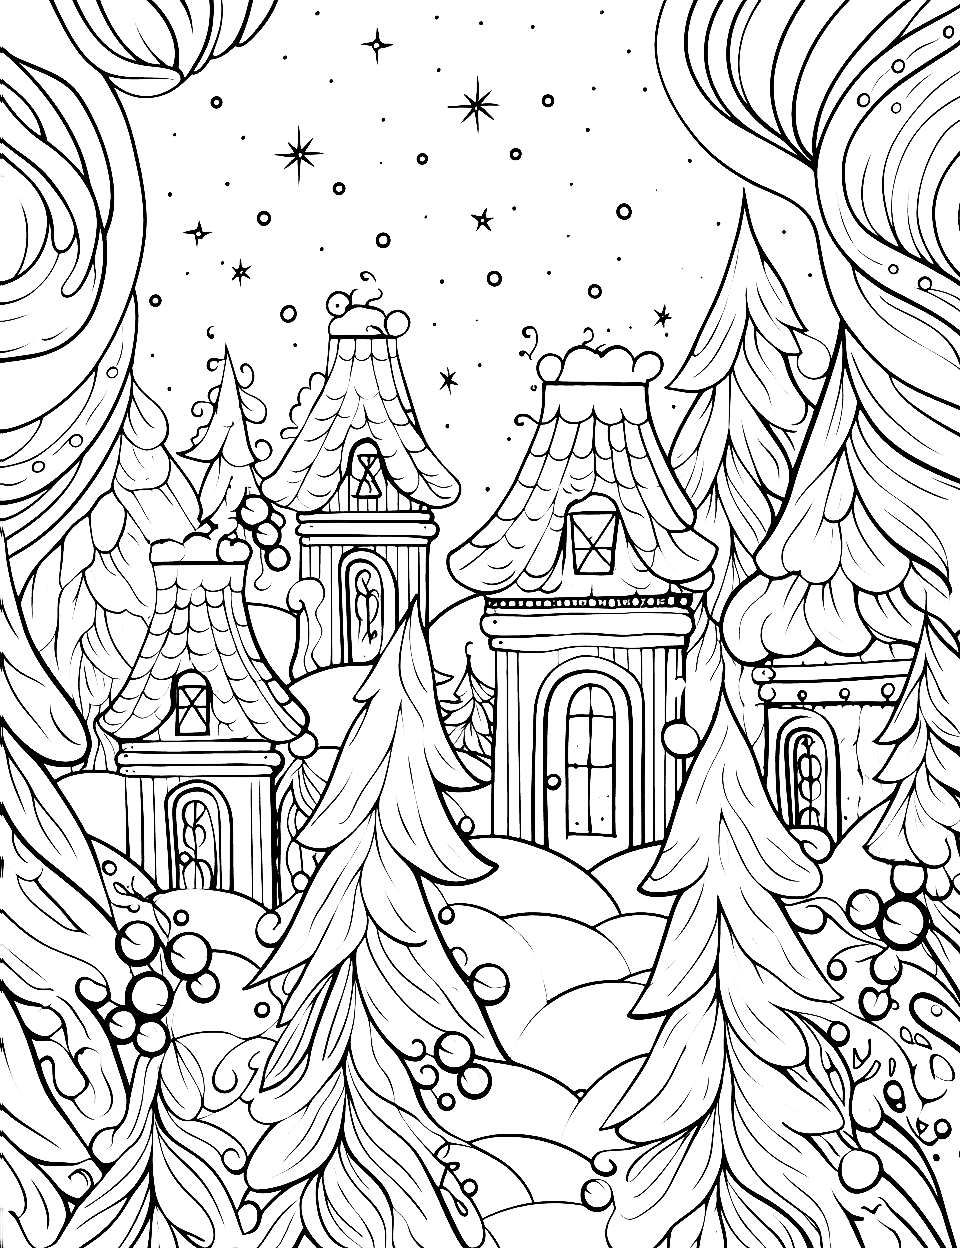 Snowy Night Adult Coloring Page - A night scene, with lots of trees and falling snow.